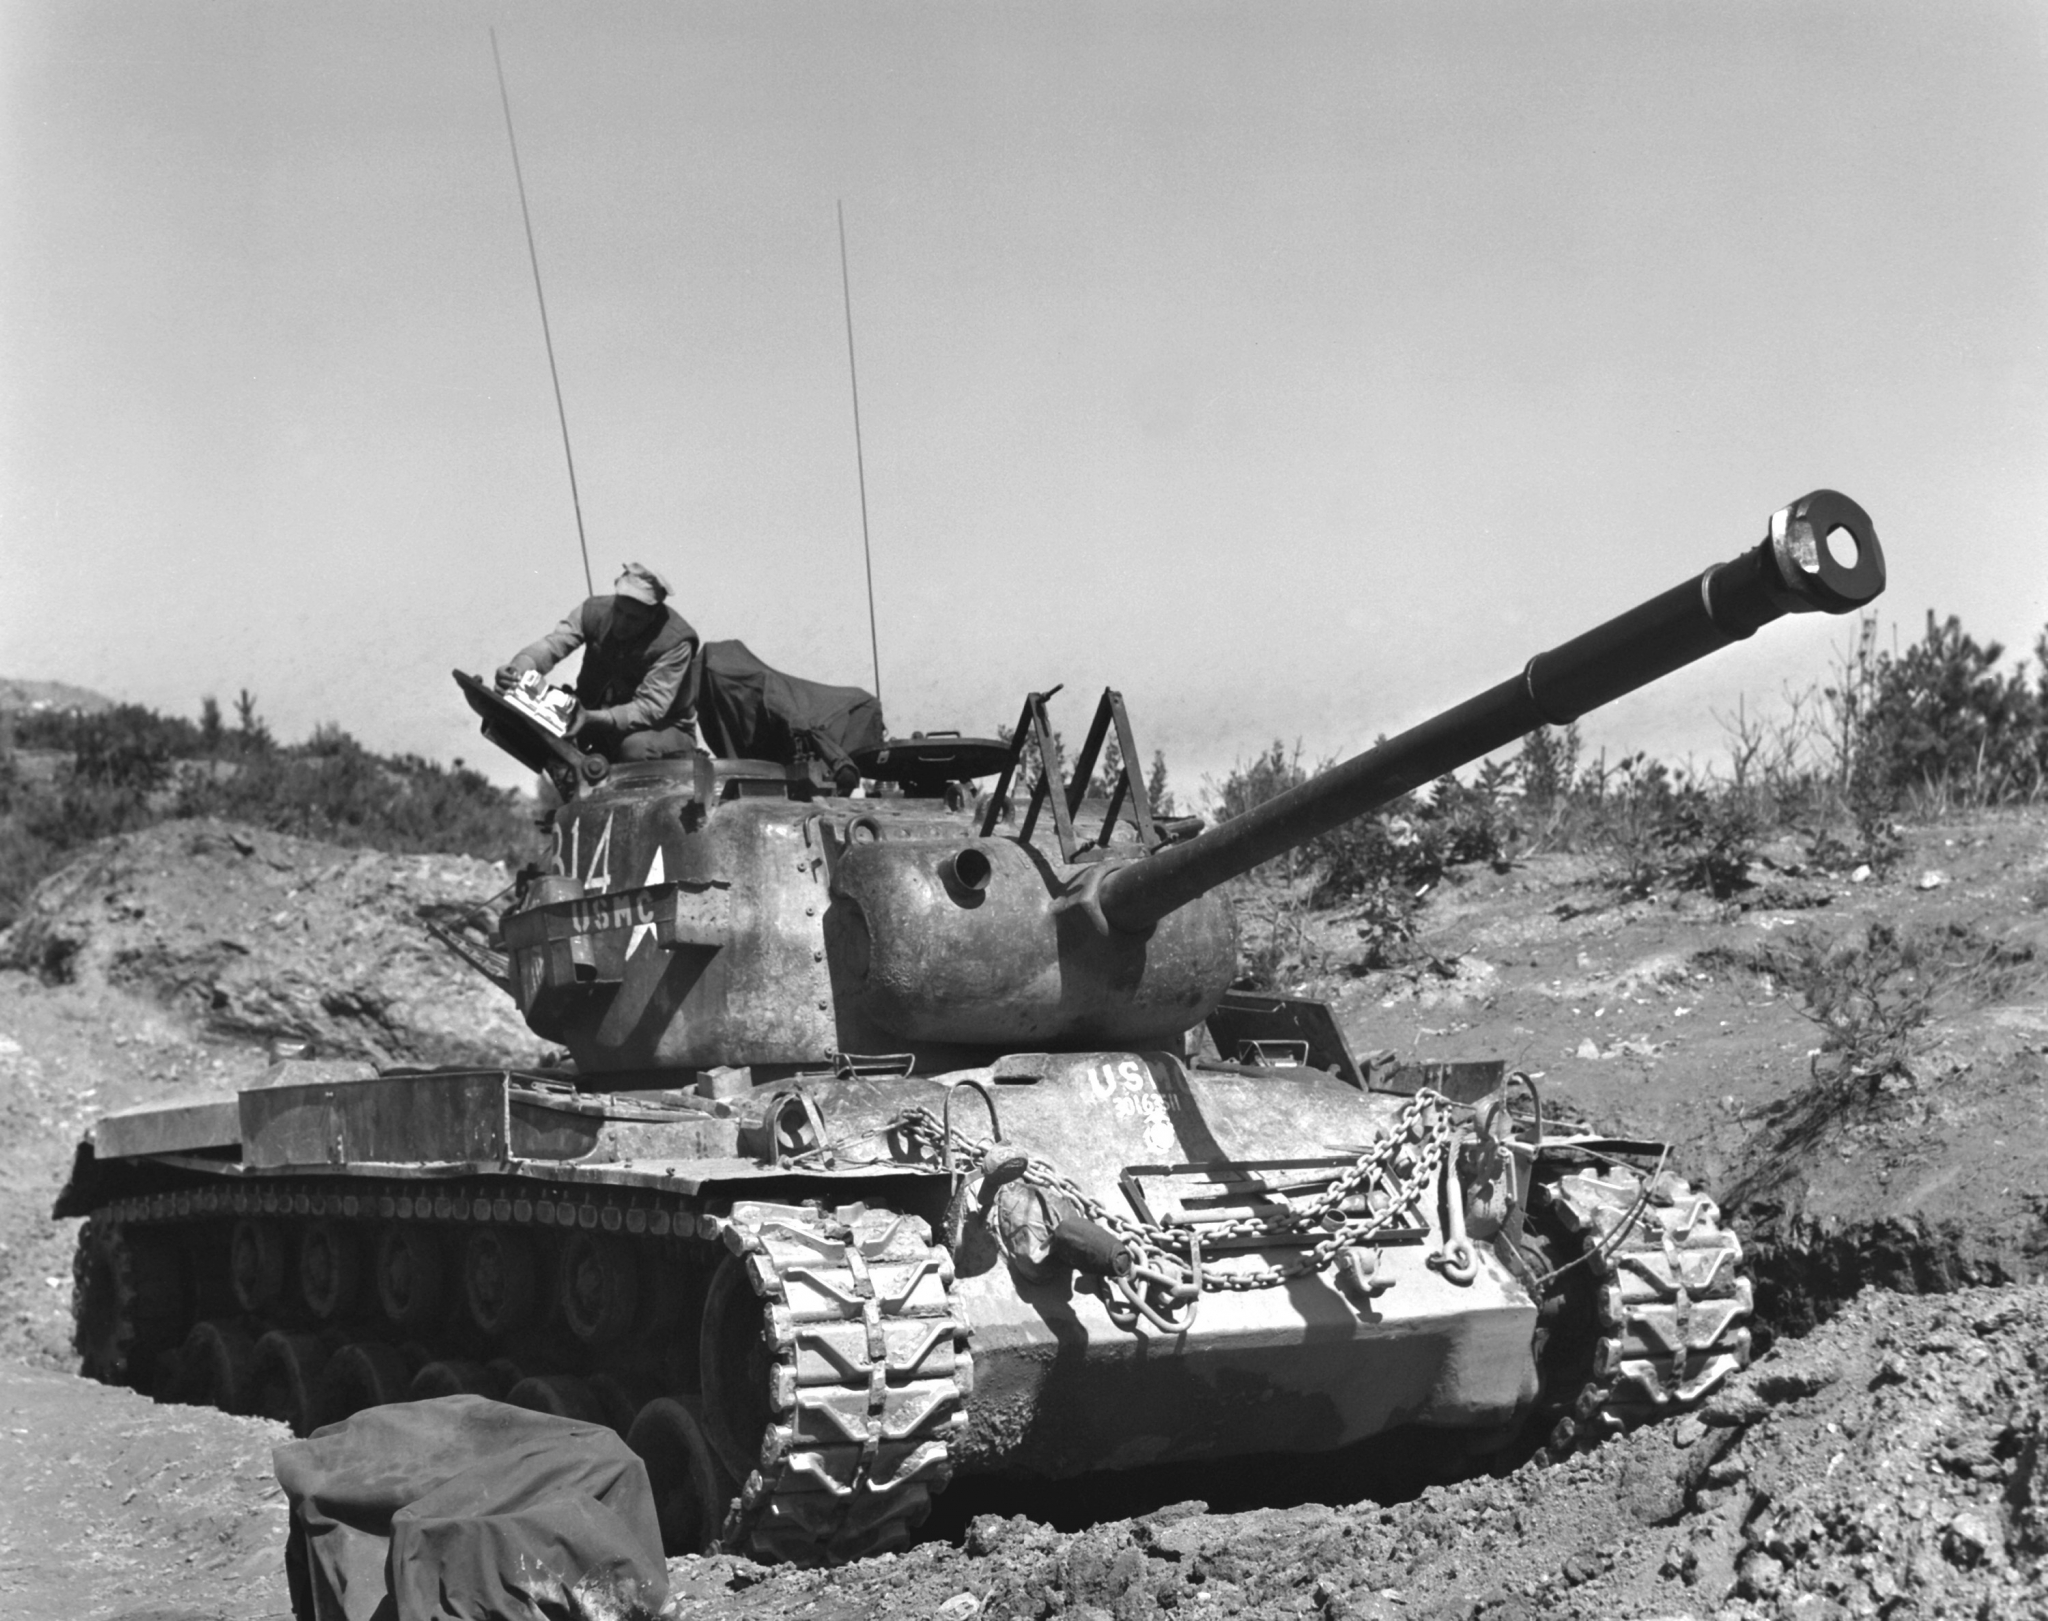 M46 Patton Years active: 1949 - 1957